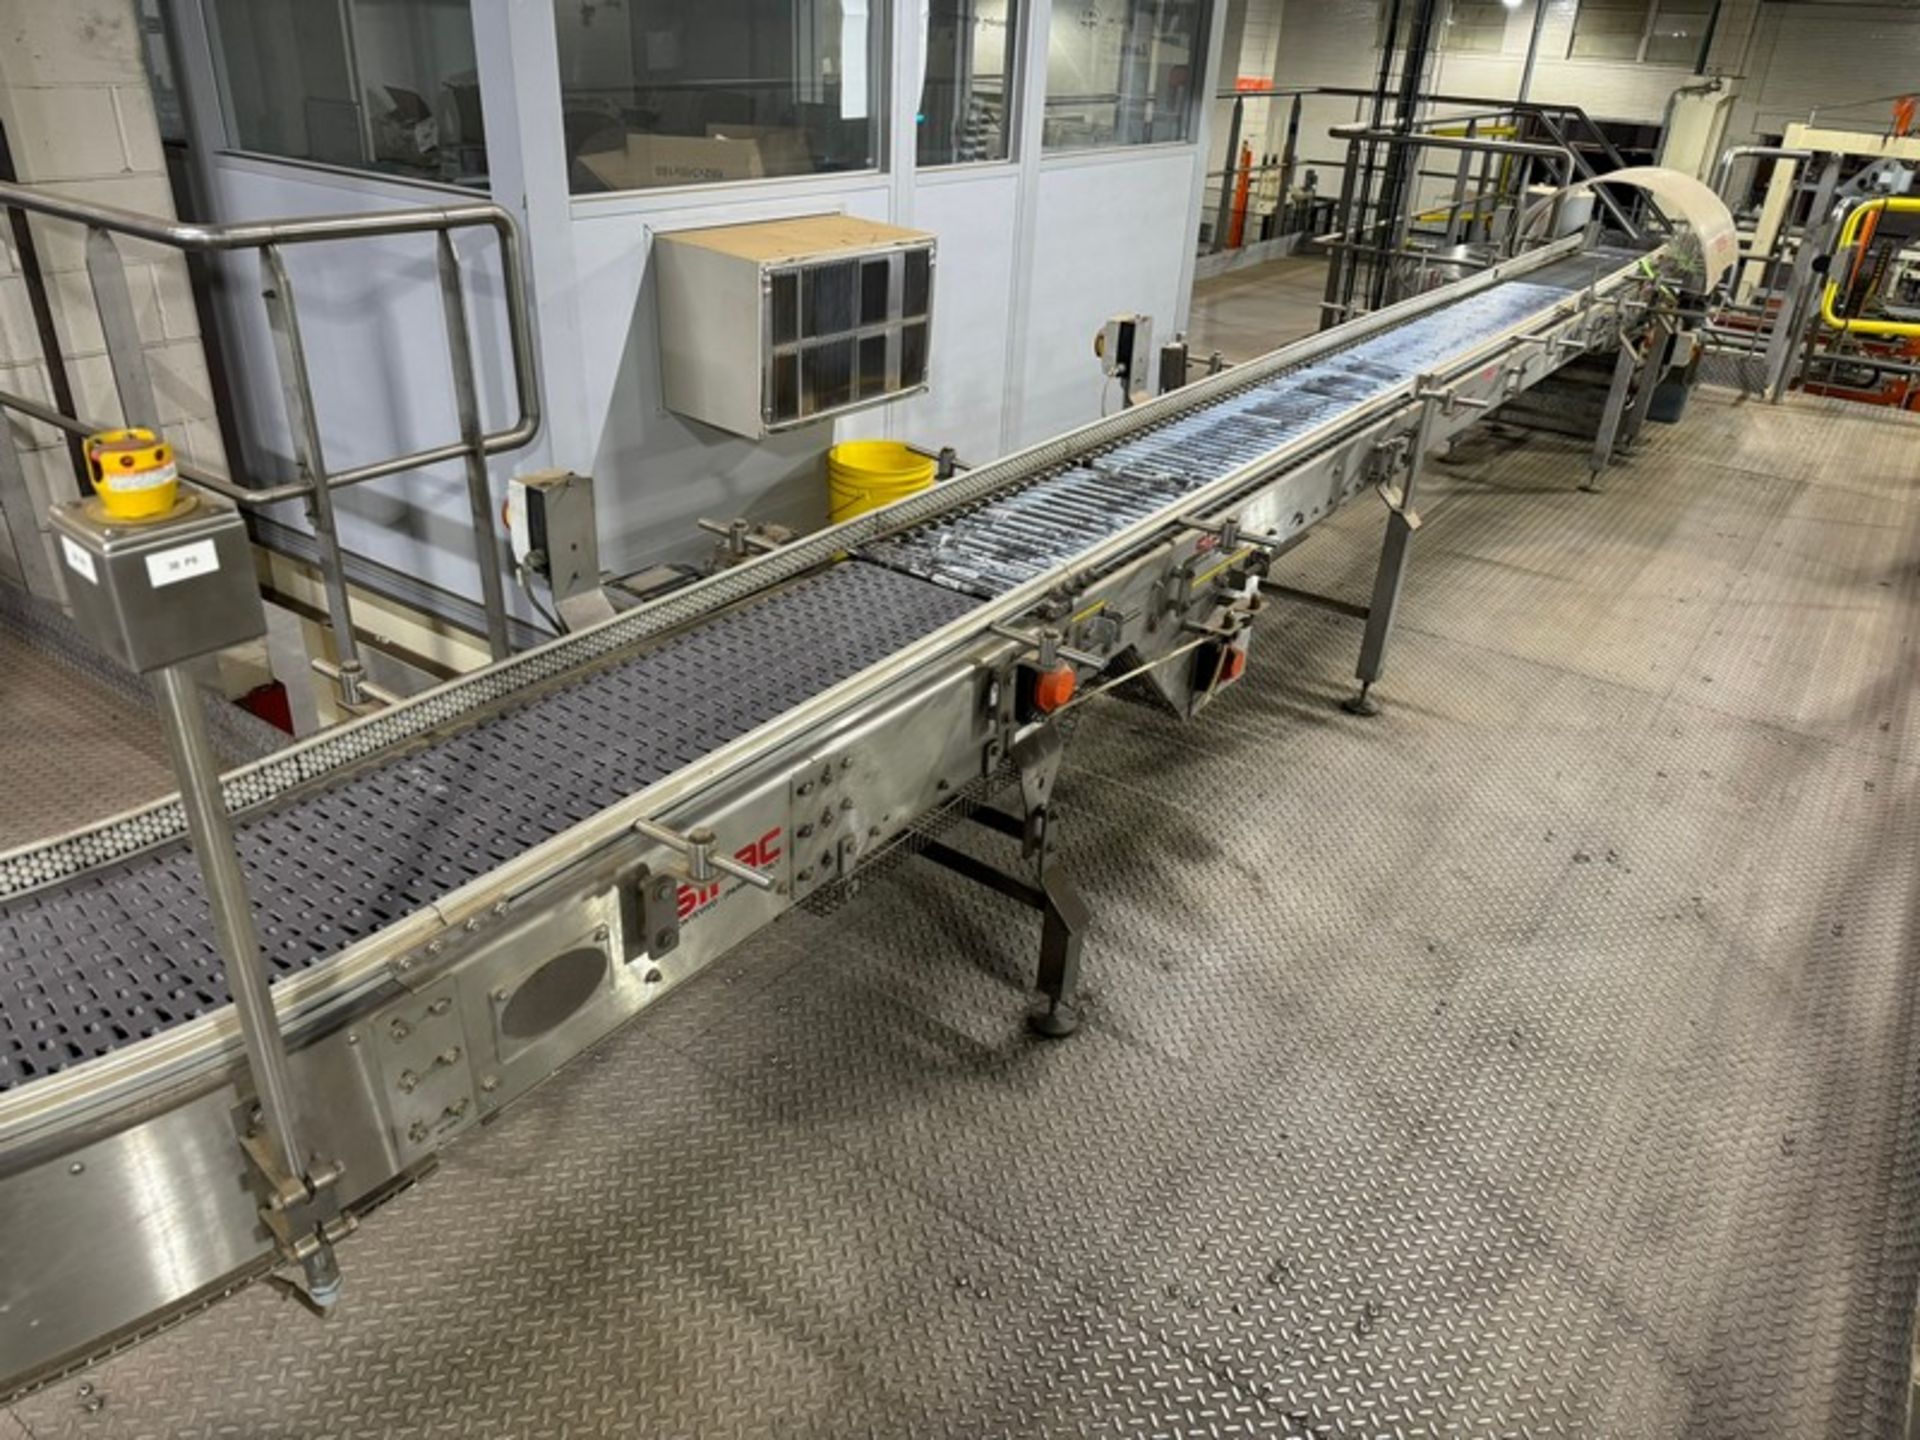 SIPAC Conveyor & Roller Conveyor, with 1-90 Degree Turn, with Aprox. 12” W Conveyor Belt, with - Image 2 of 6